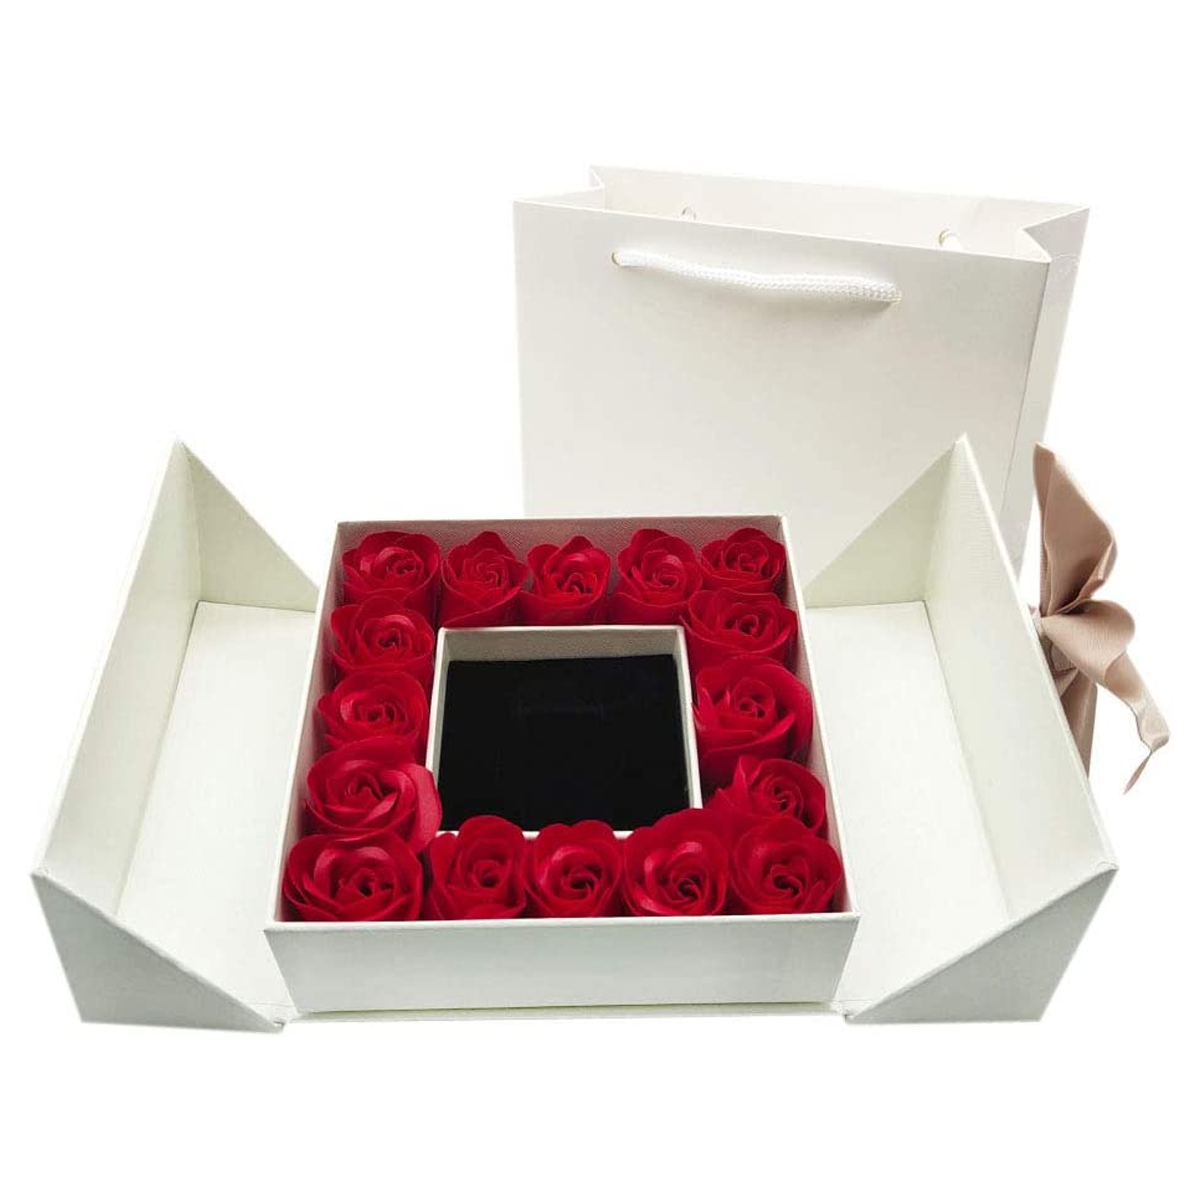 Olmecs Romantic Rose Jewelry Gift Box, with Small Carry Bag for Valentine Day or Wedding Day